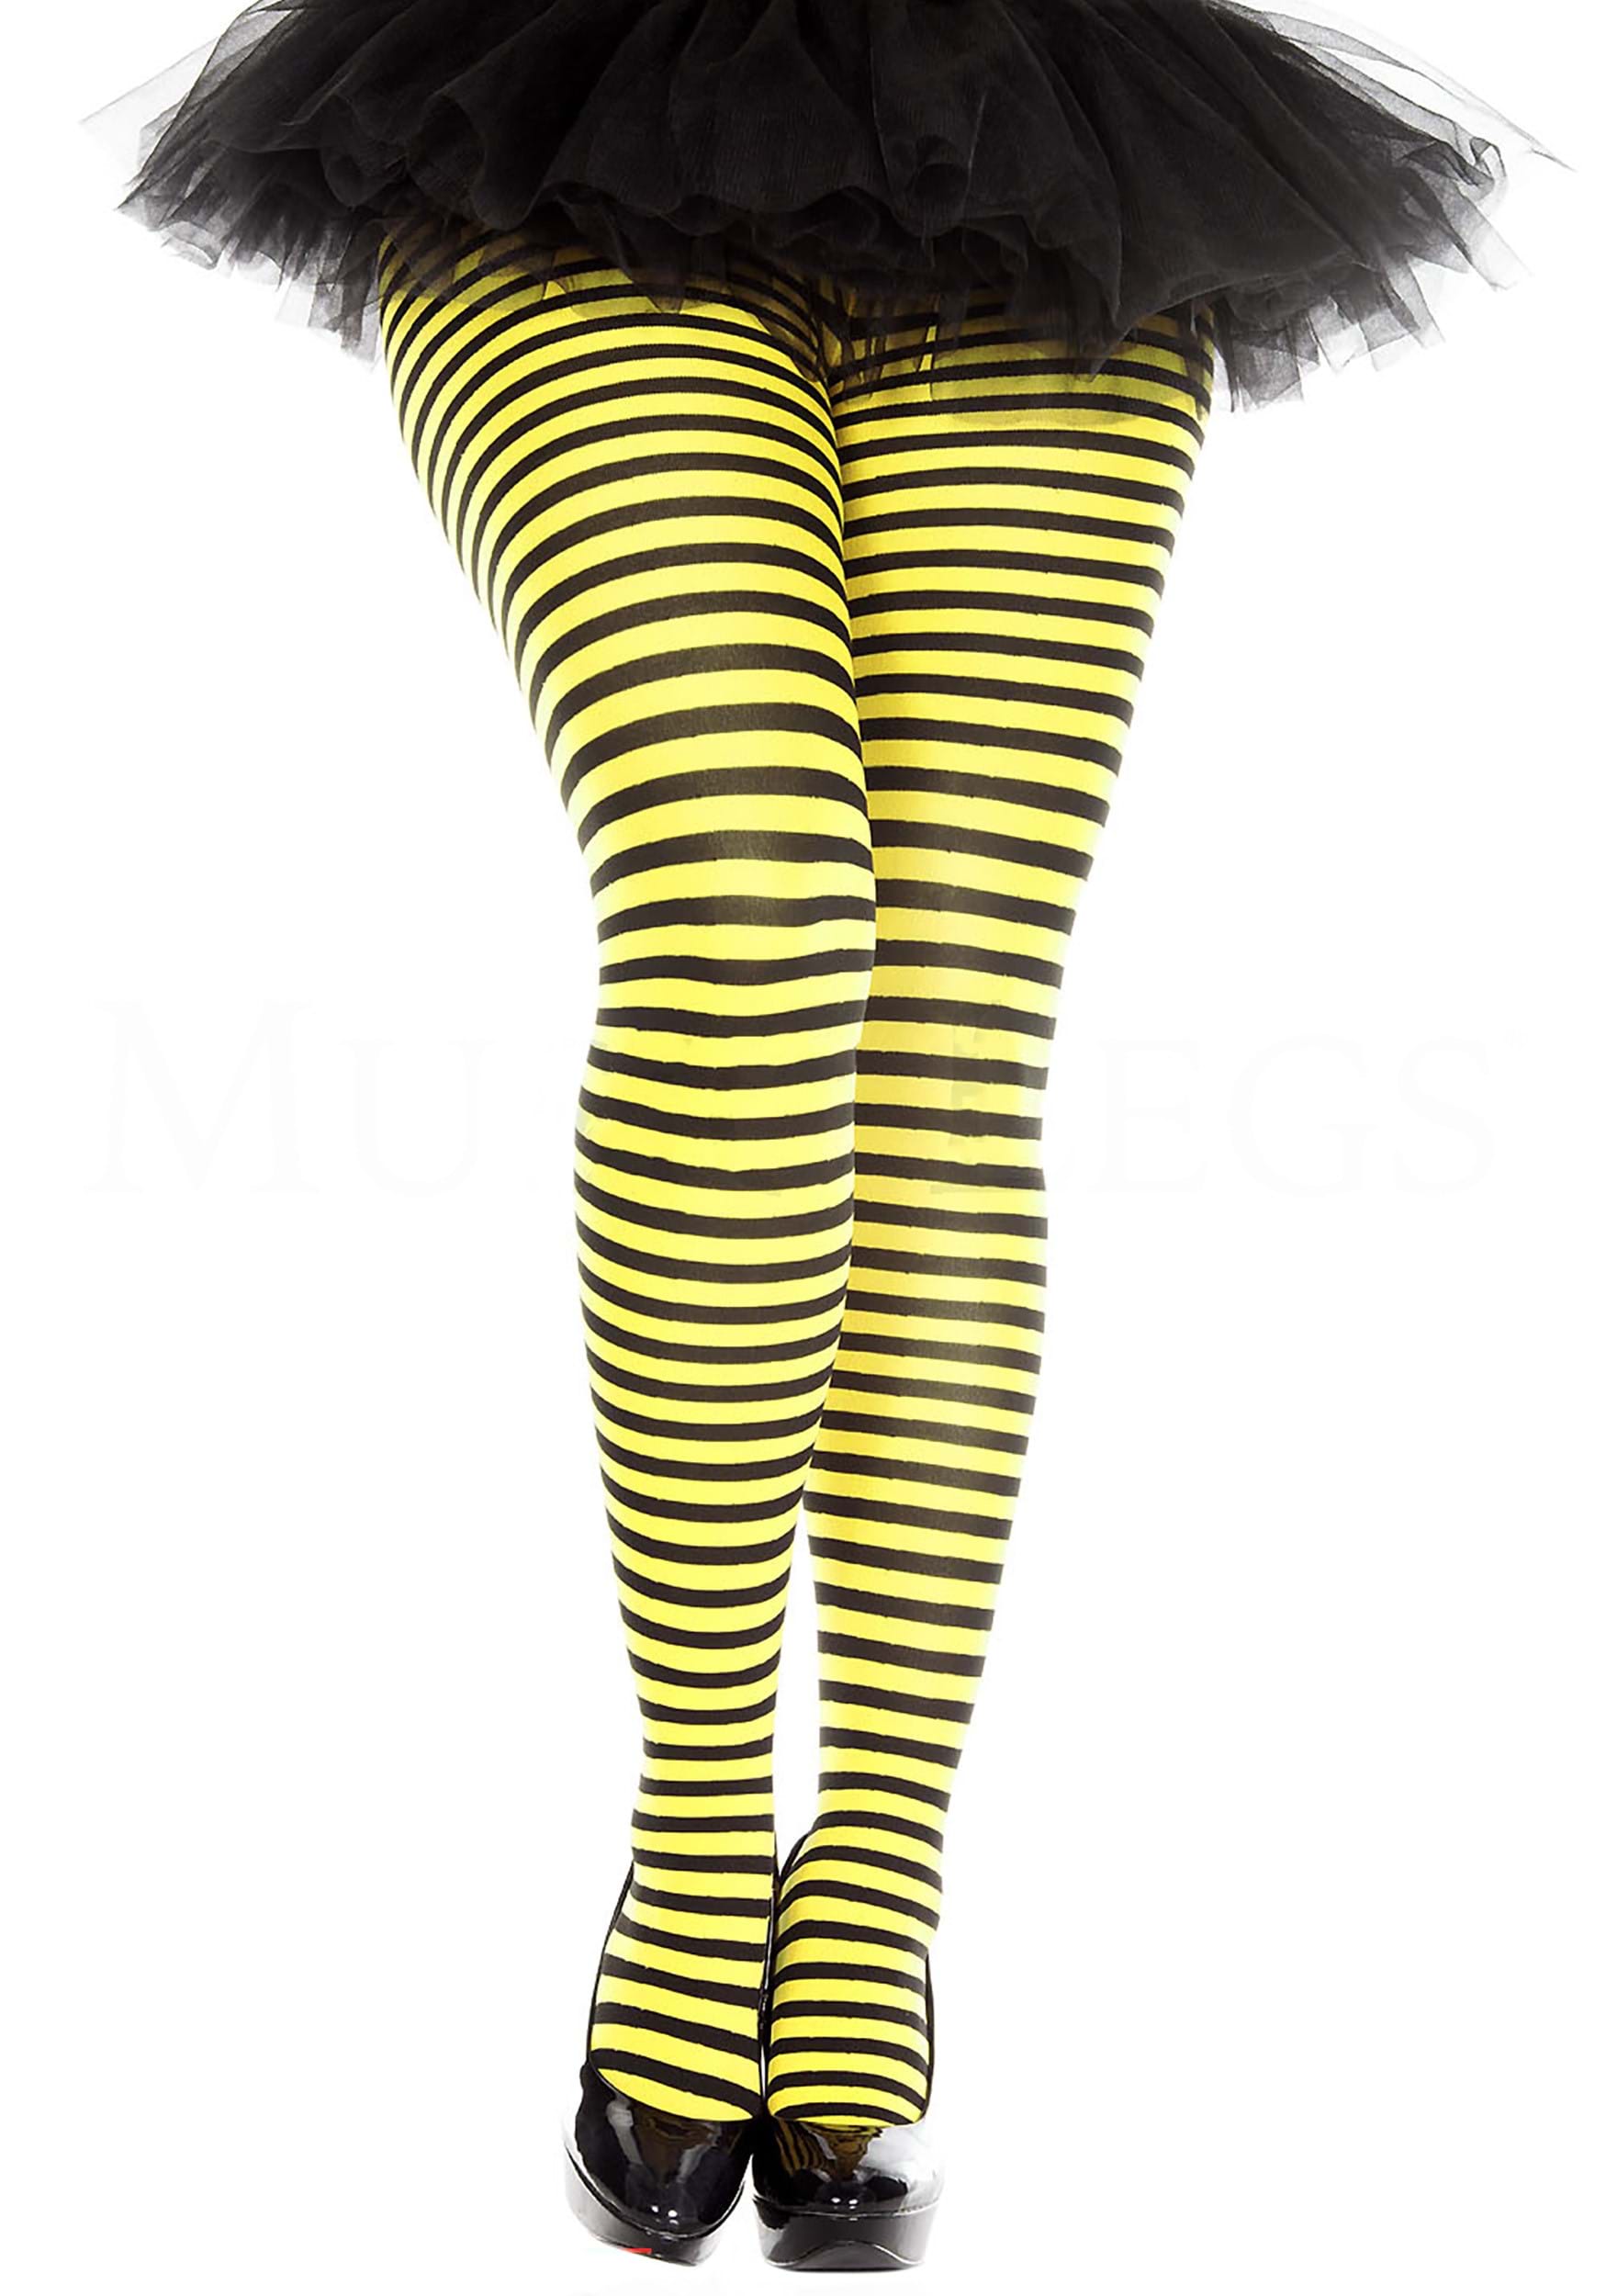 https://images.halloweencostumes.com/products/93394/1-1/womens-plus-black-and-yellow-stripe-tights.jpg